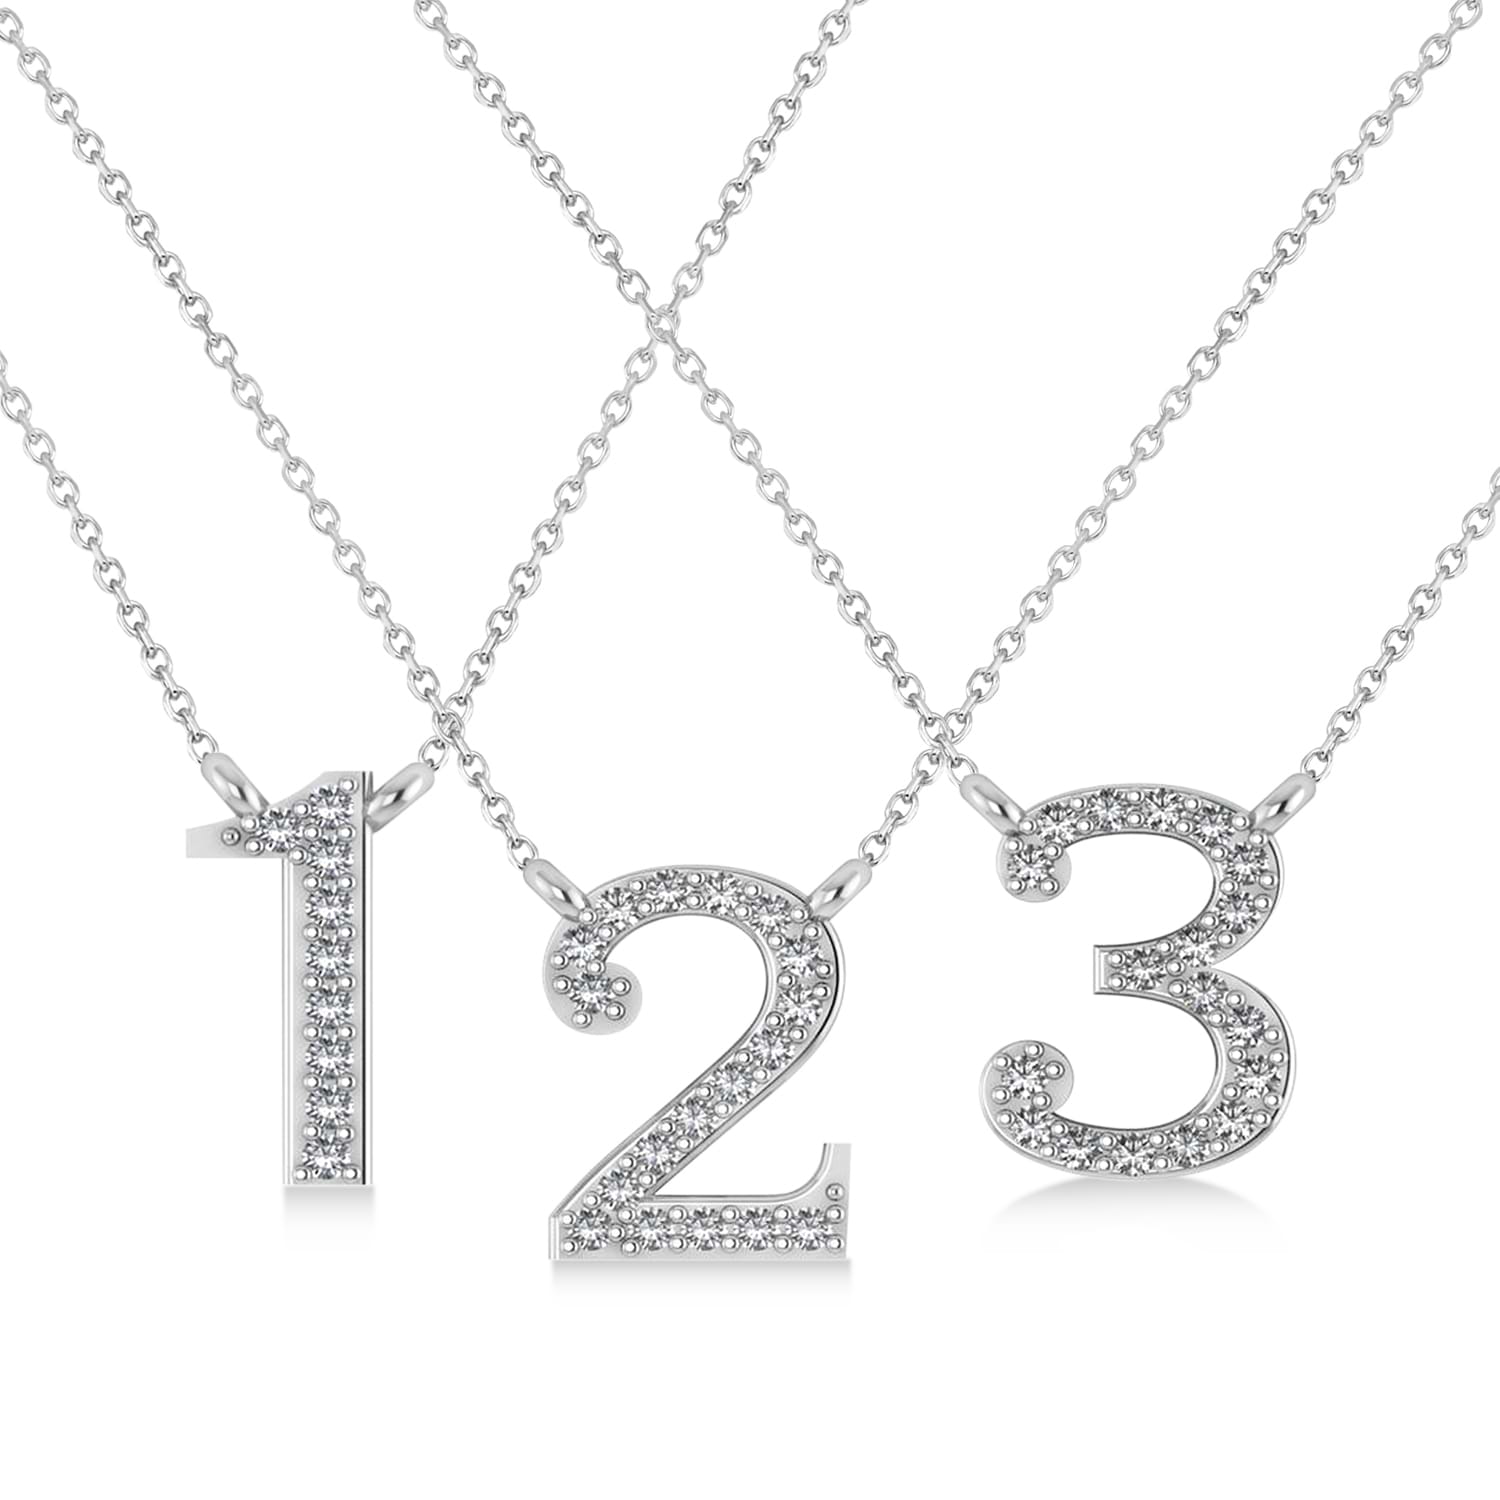 Diamond Personalized Number Pendant Necklace 14k White Gold